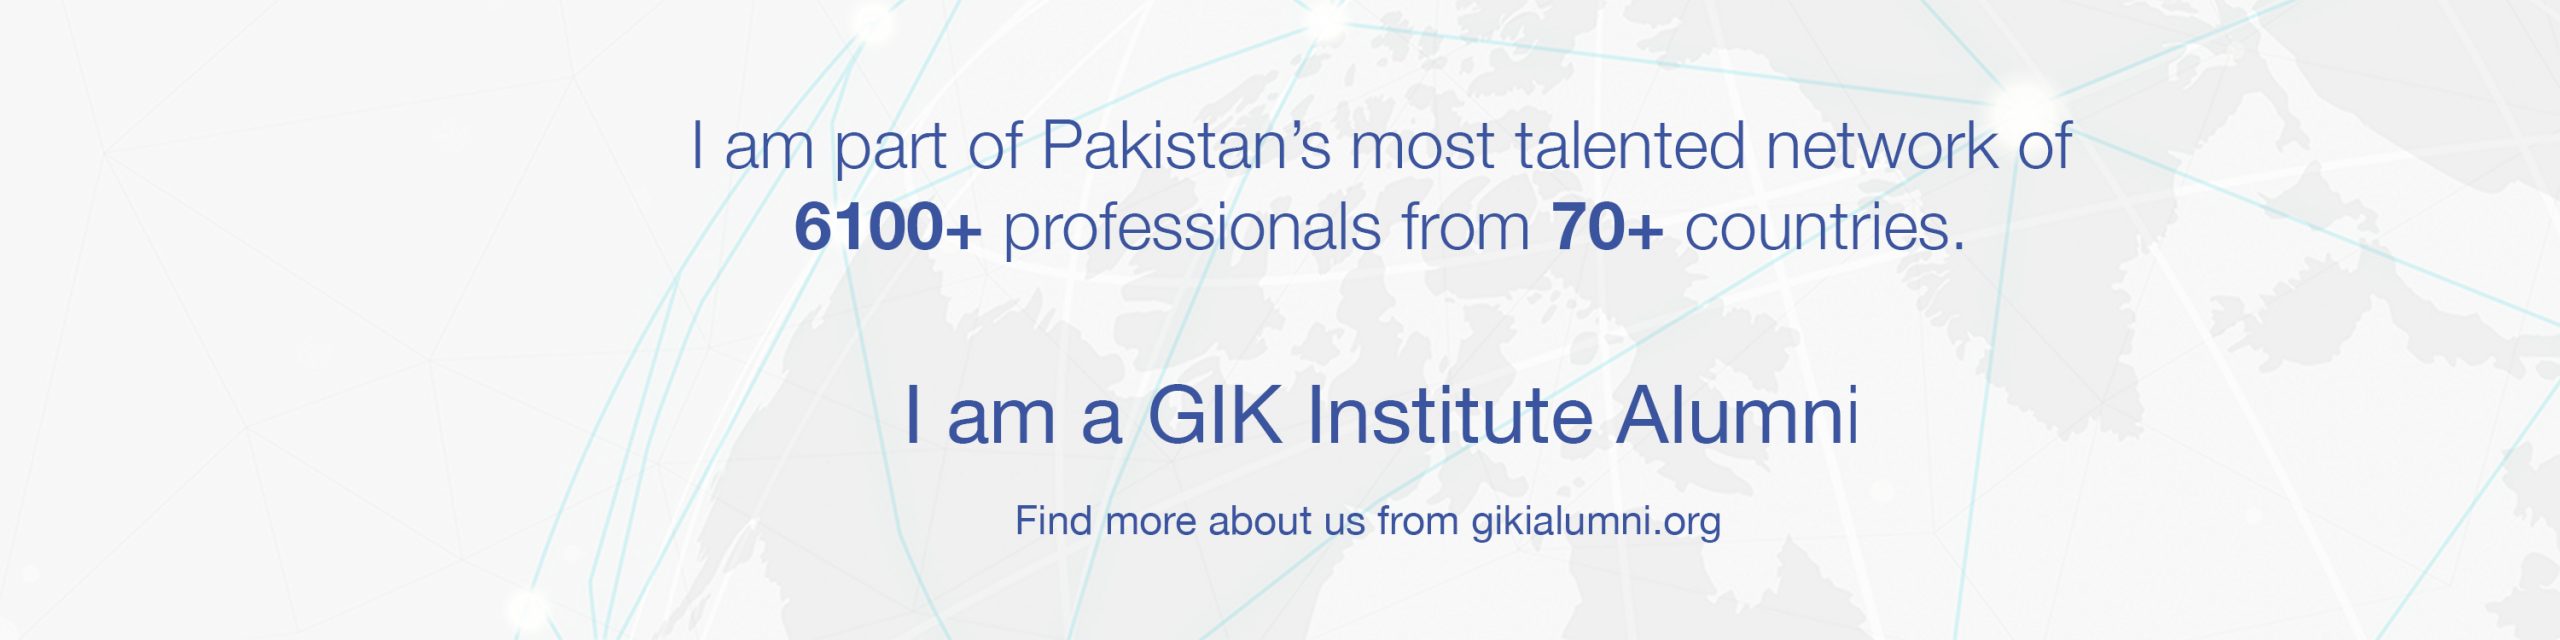 A LinkedIn Cover Photo that highlights the pride that the GIKIAA network holds